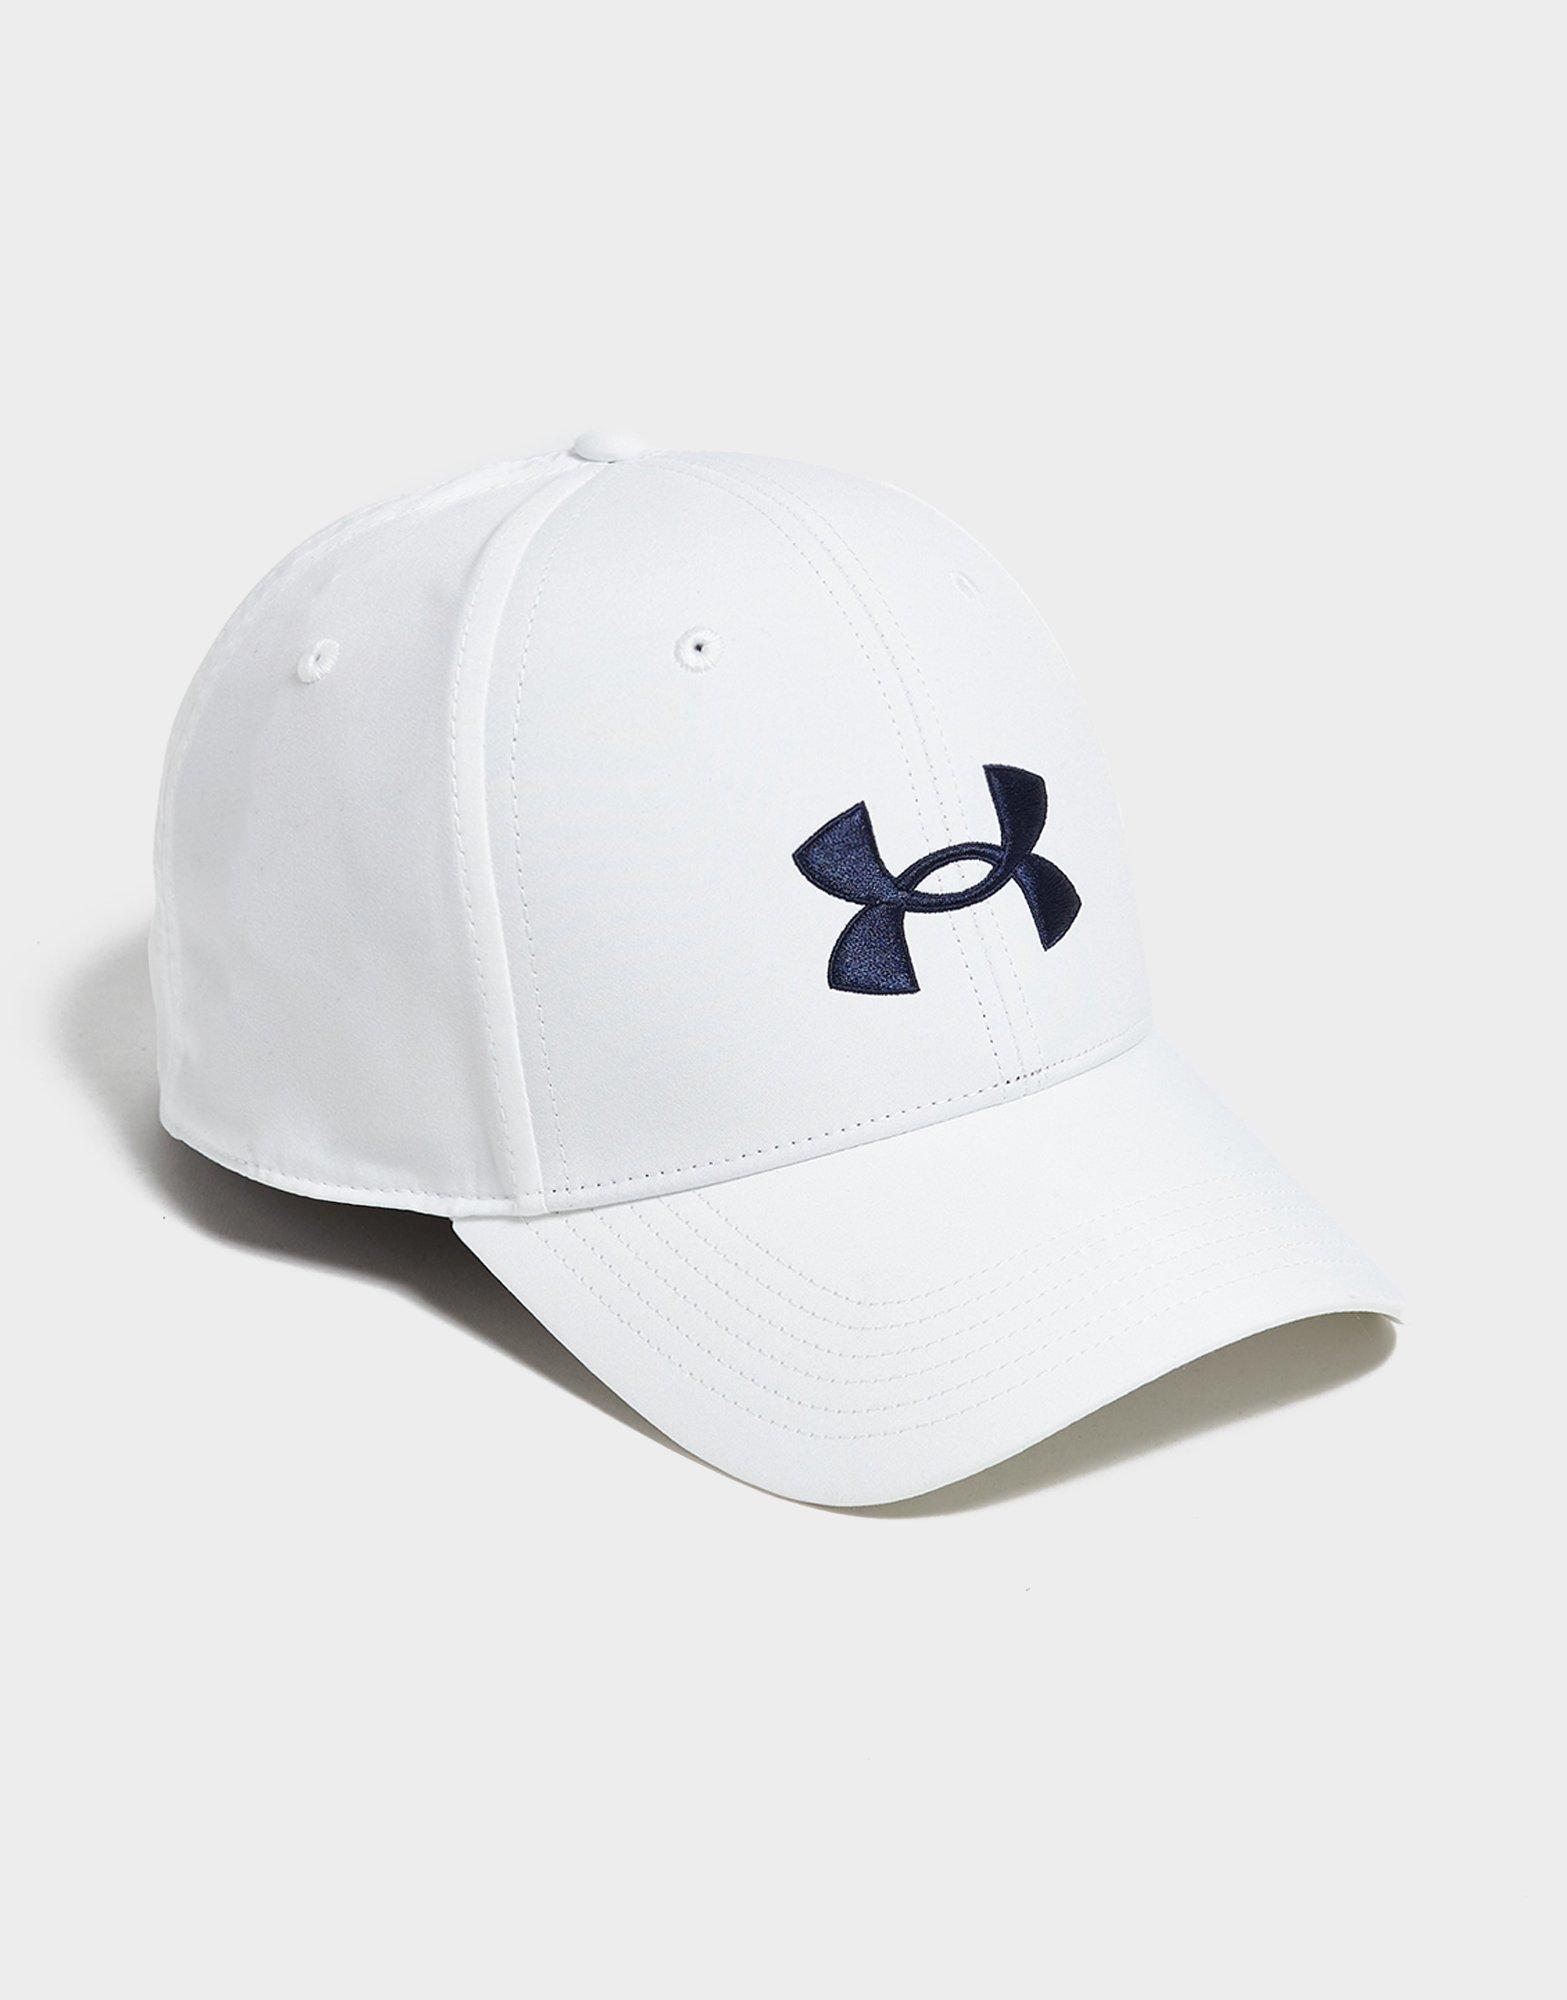 Under Armour Casquette Golf 96 Blanc- JD Sports France